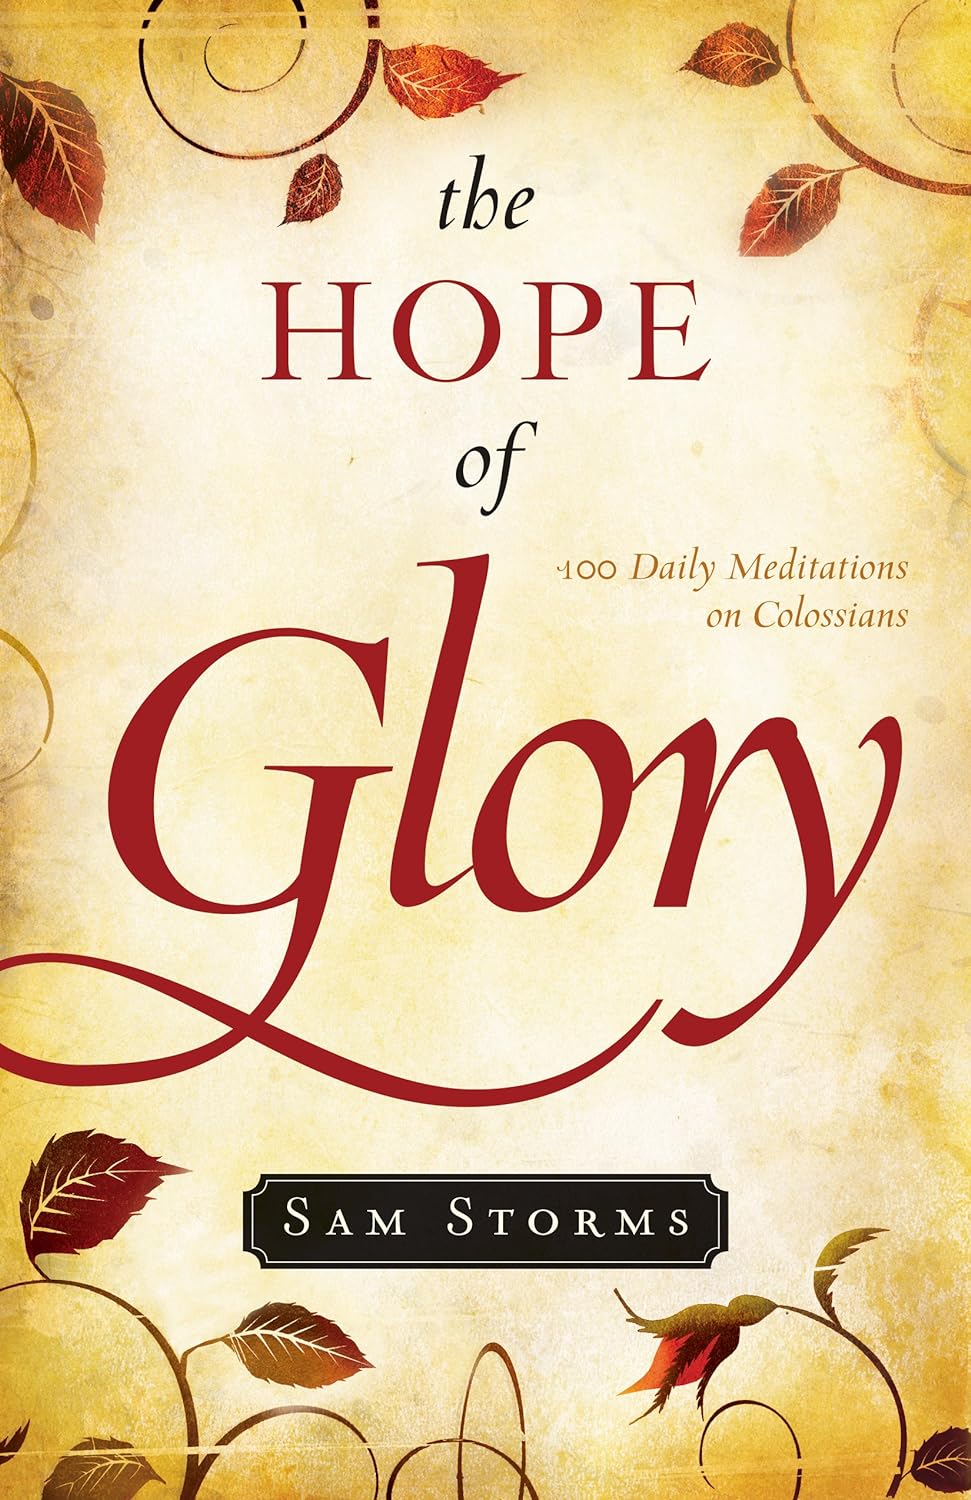 The Hope of Glory- 100 Daily Meditations on Colossians